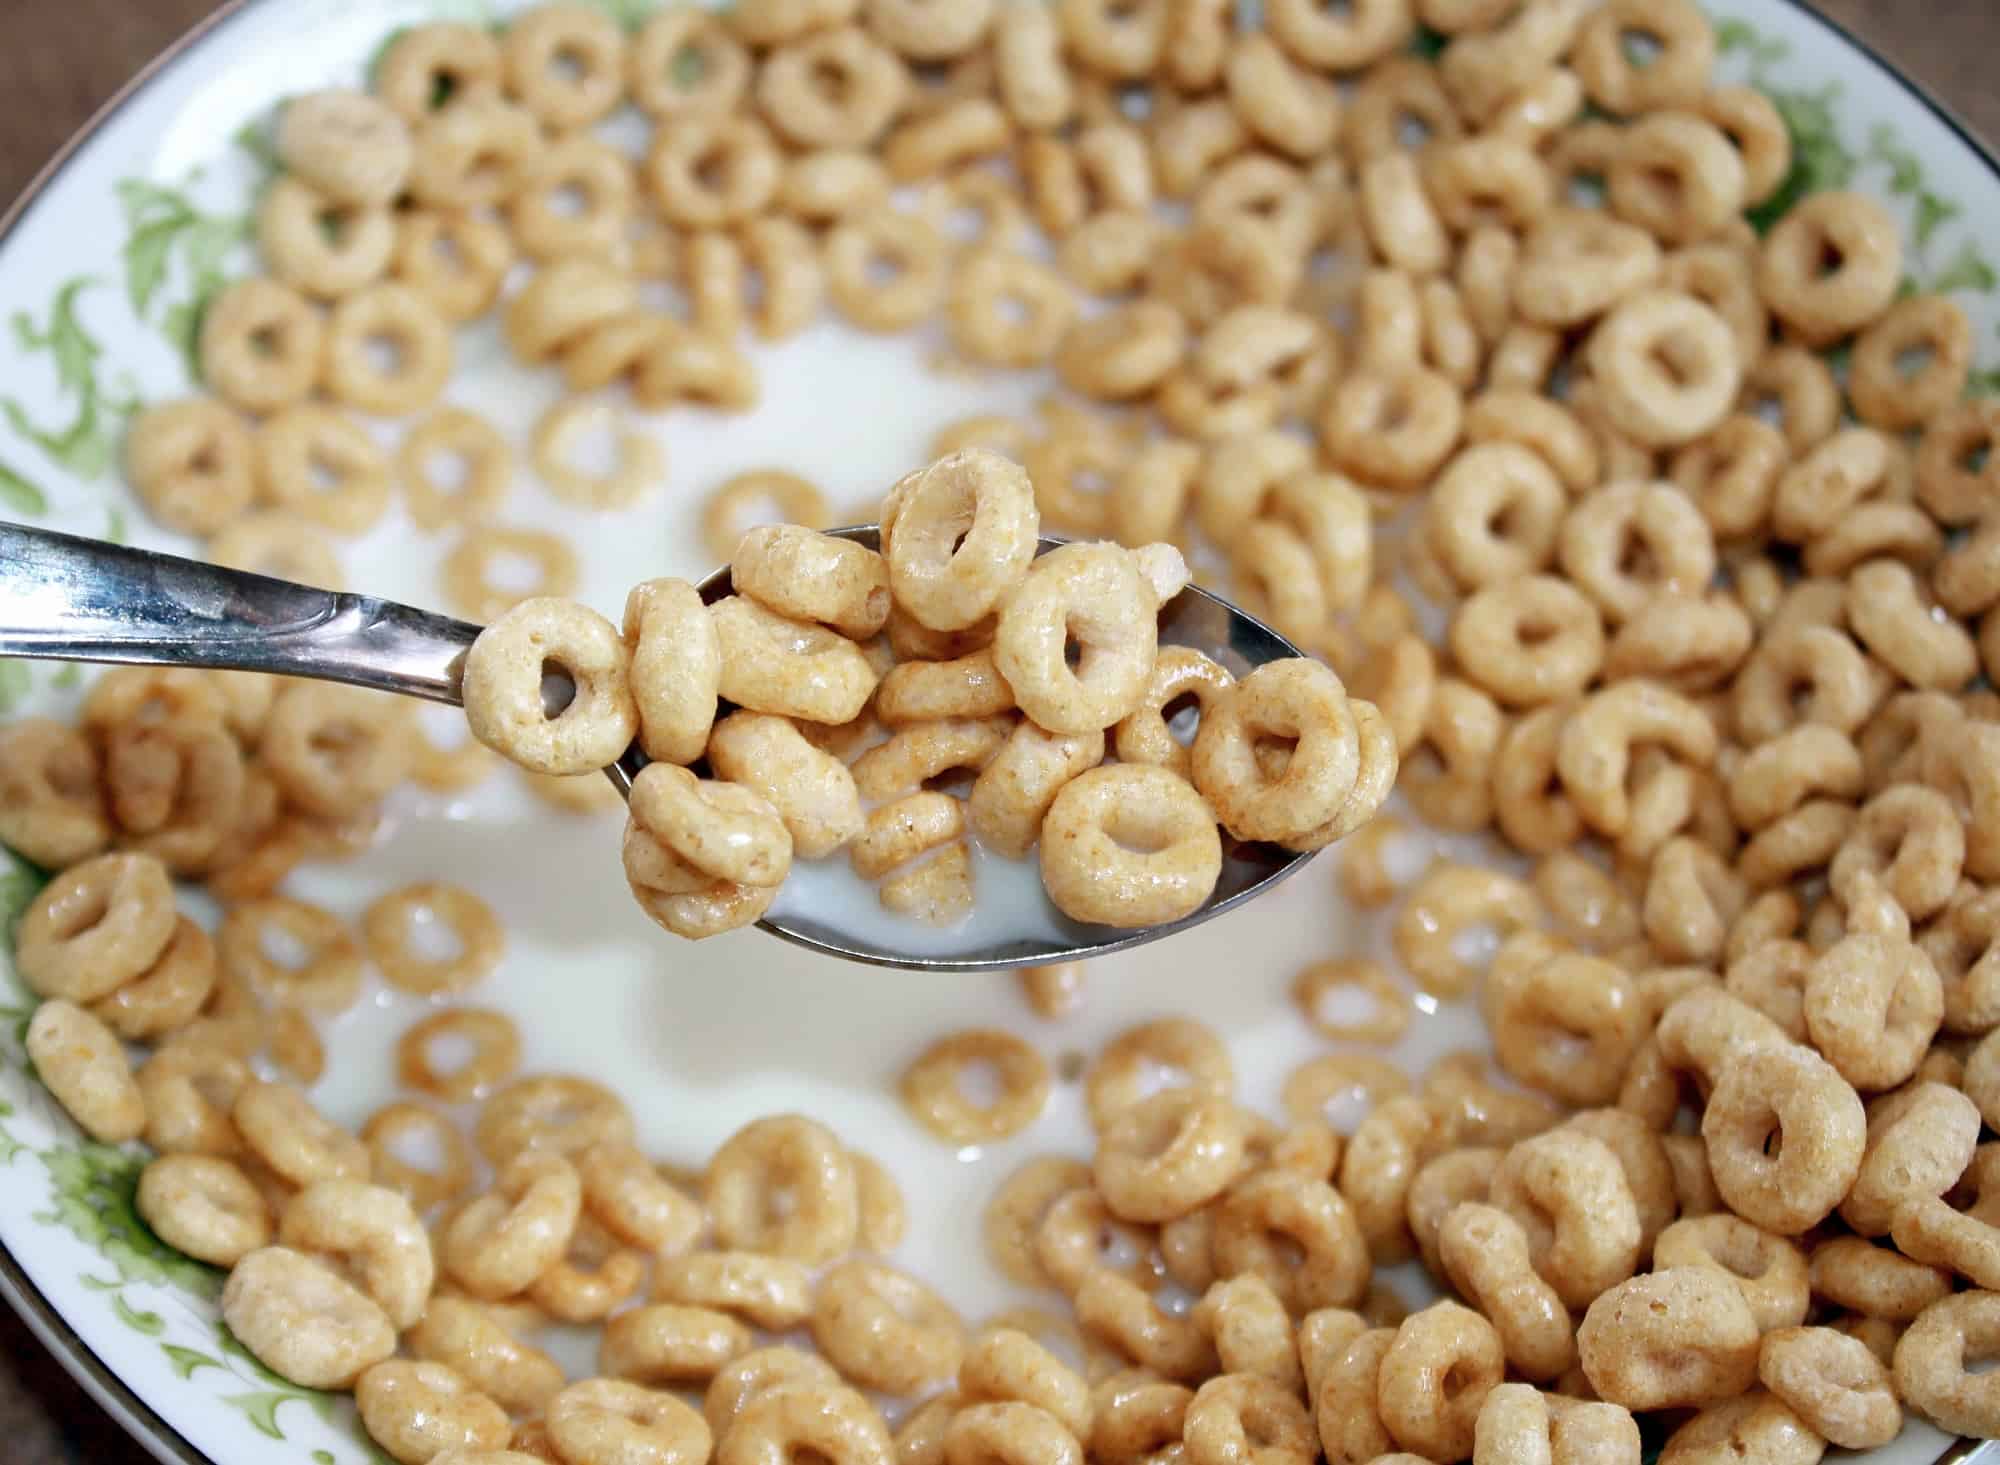 Cheerios contaminated with glyphosate in a bowl